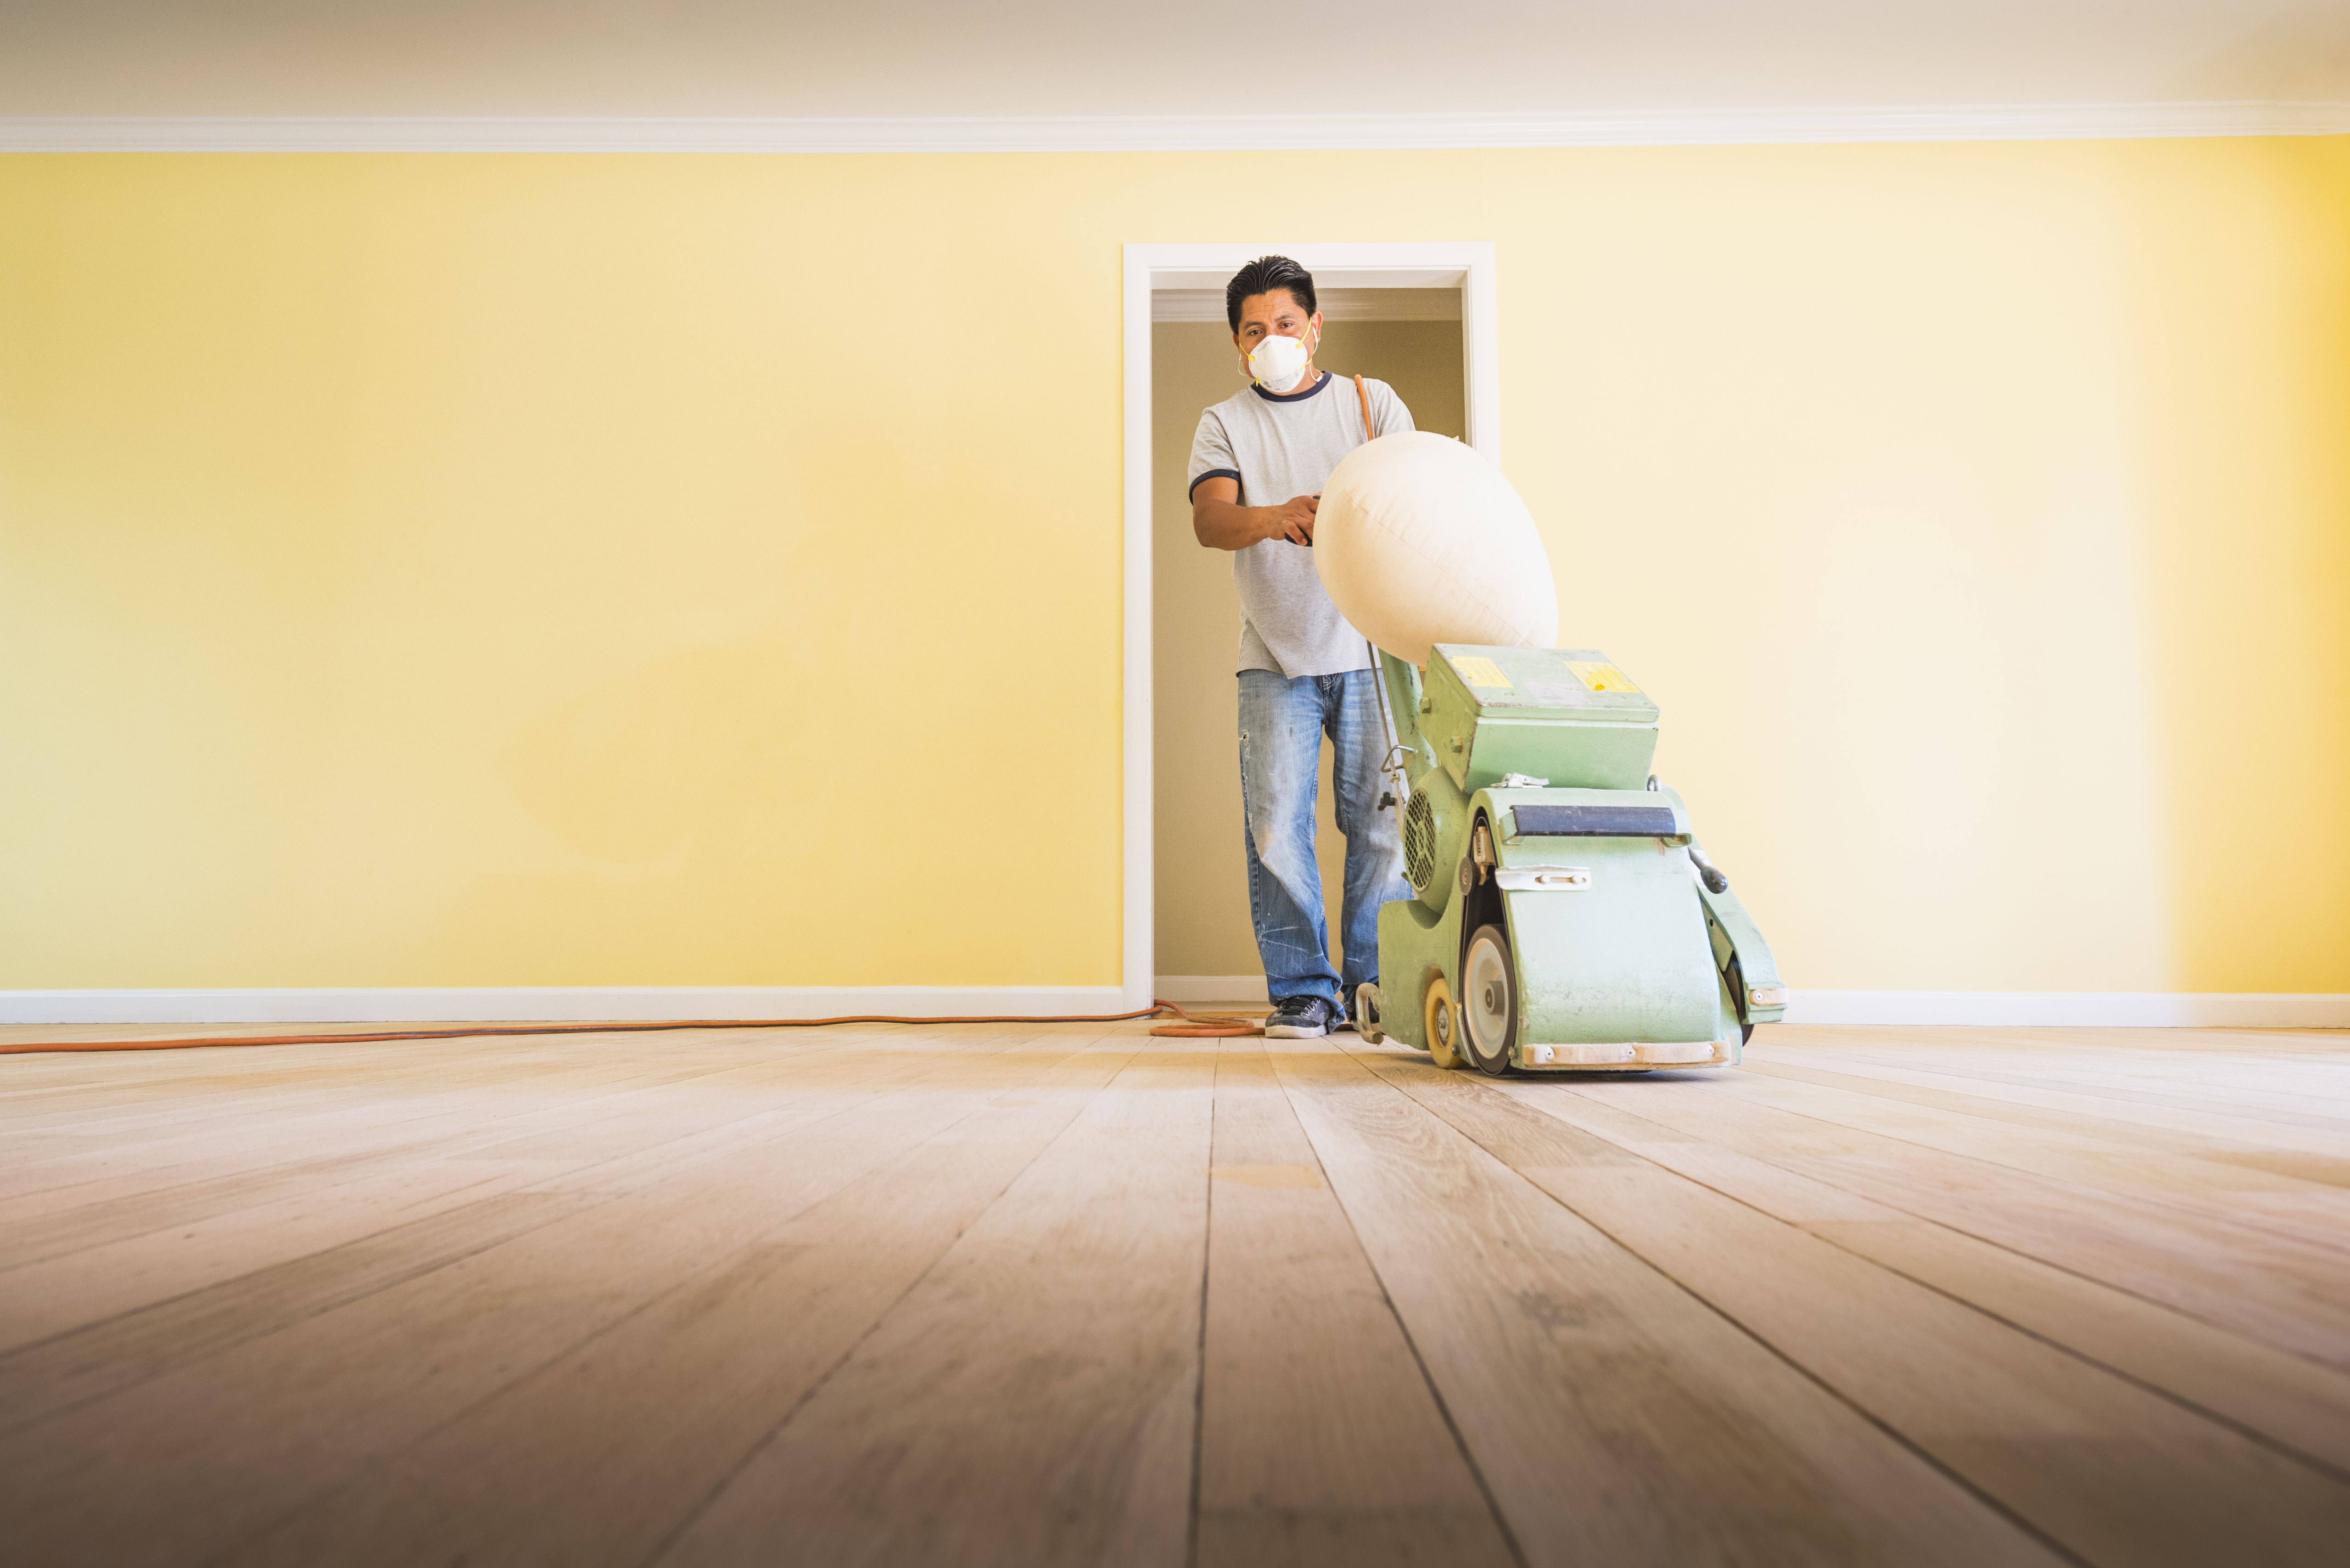 20 Unique How Much Does It Cost to Refinish Hardwood Floors 2024 free download how much does it cost to refinish hardwood floors of should you paint walls or refinish floors first in floorsandingafterpainting 5a8f08dfae9ab80037d9d878